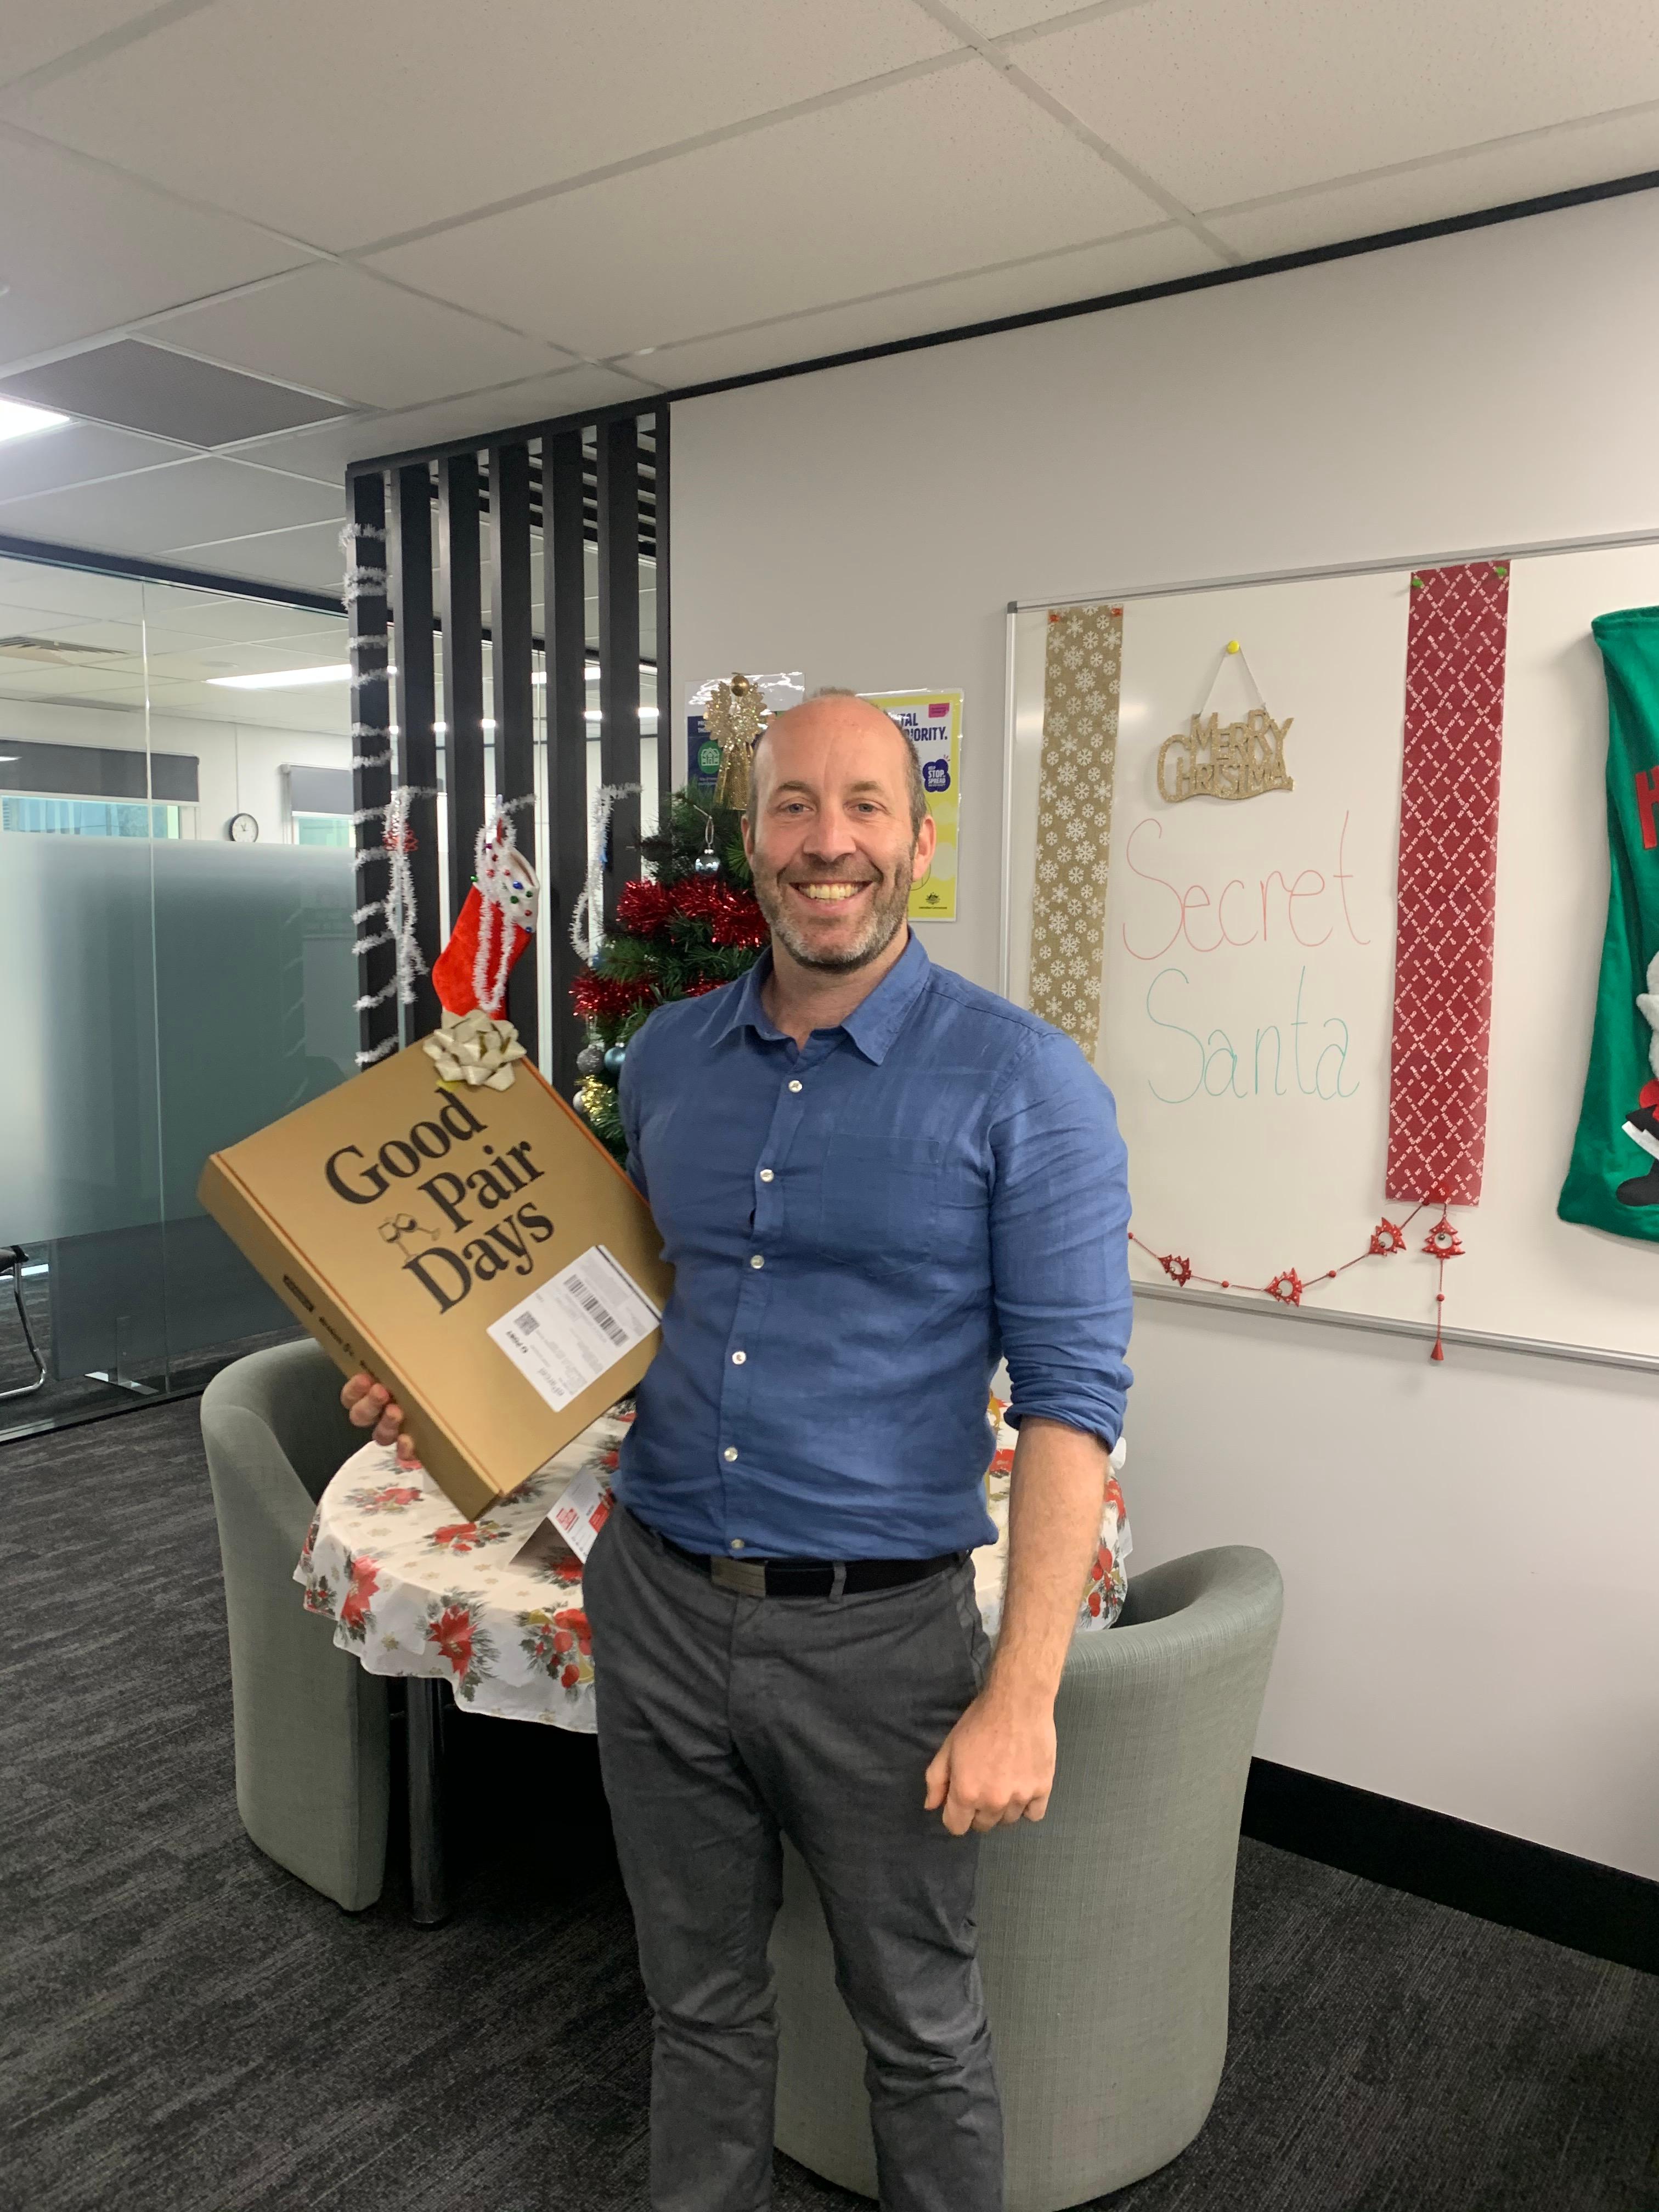 An Equiem Christmas tenant experience activation prize-winner.